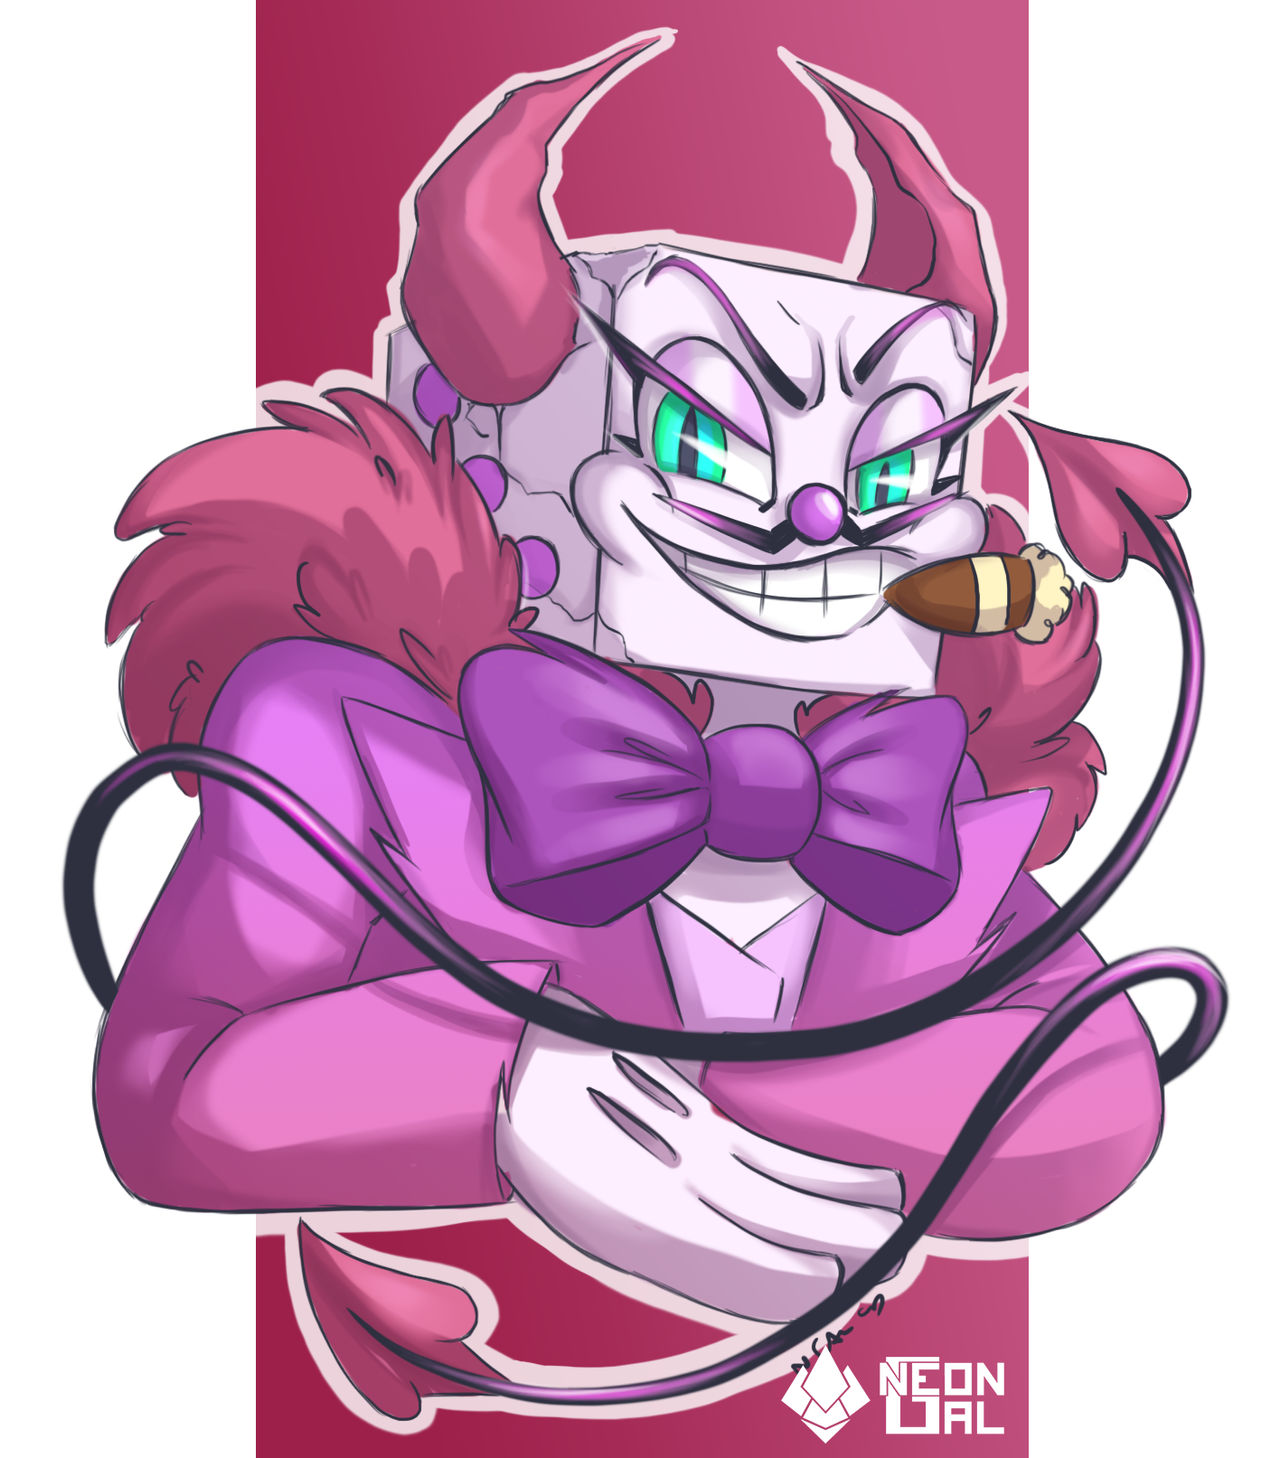 King Dice and Devil by Manoma614 on DeviantArt